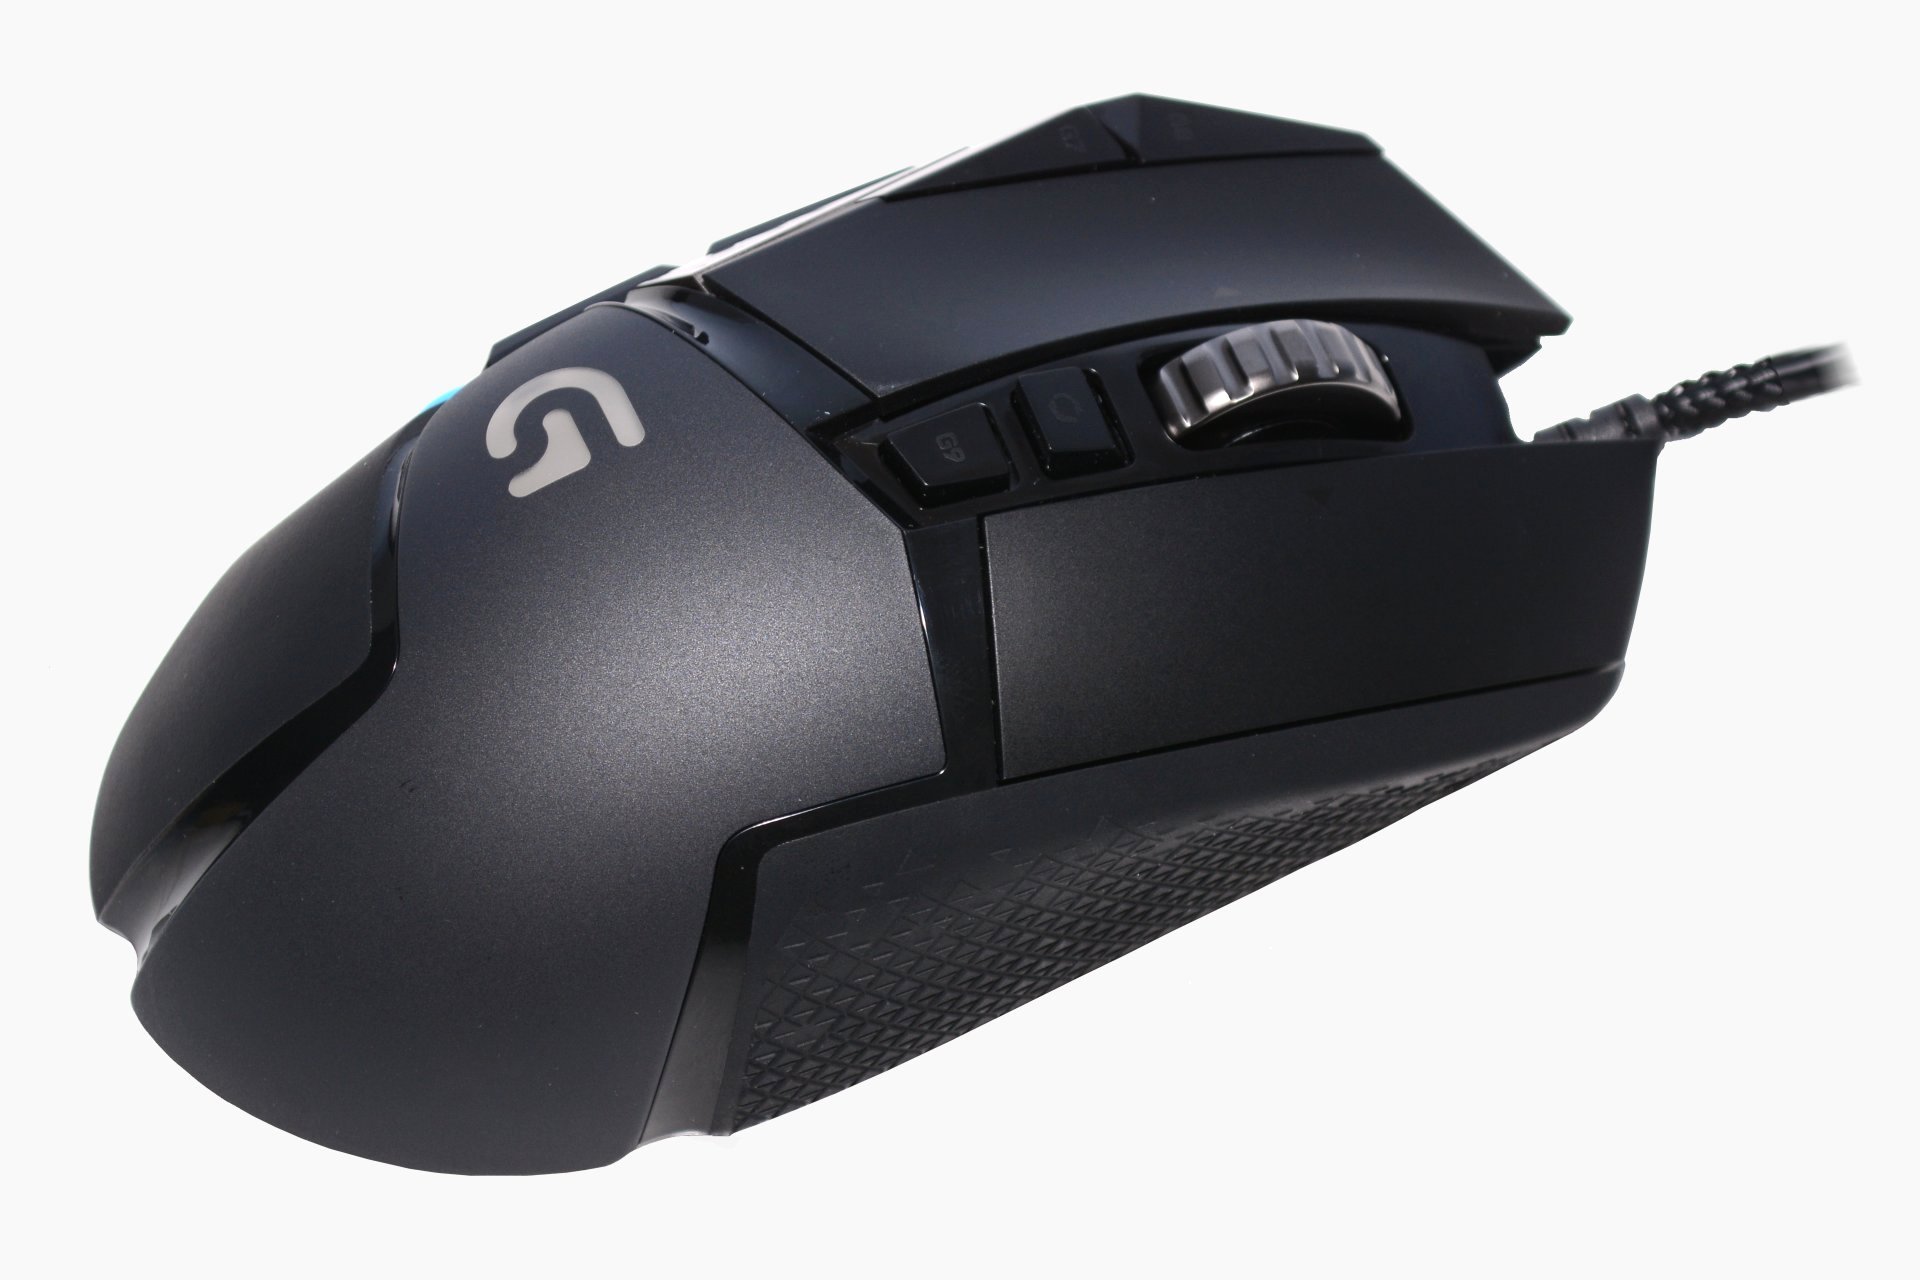 How to download logitech g502